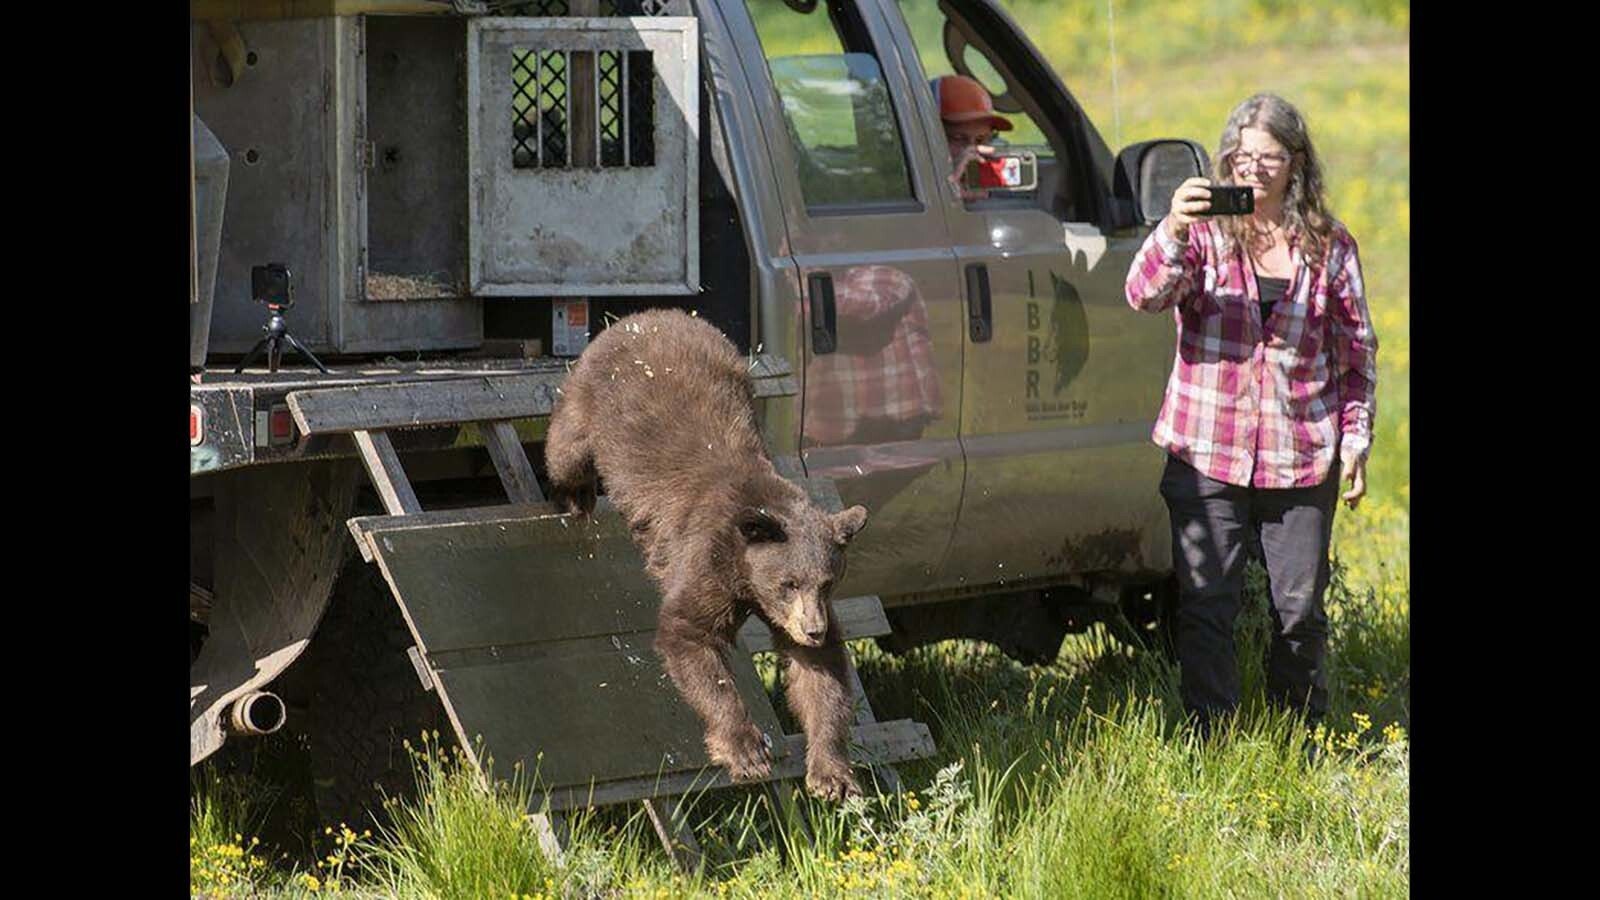 Idaho Black Bear Rehab Director Amy Kidwell watches as a Wyoming bear cub named Wyatt is released back into the wild.